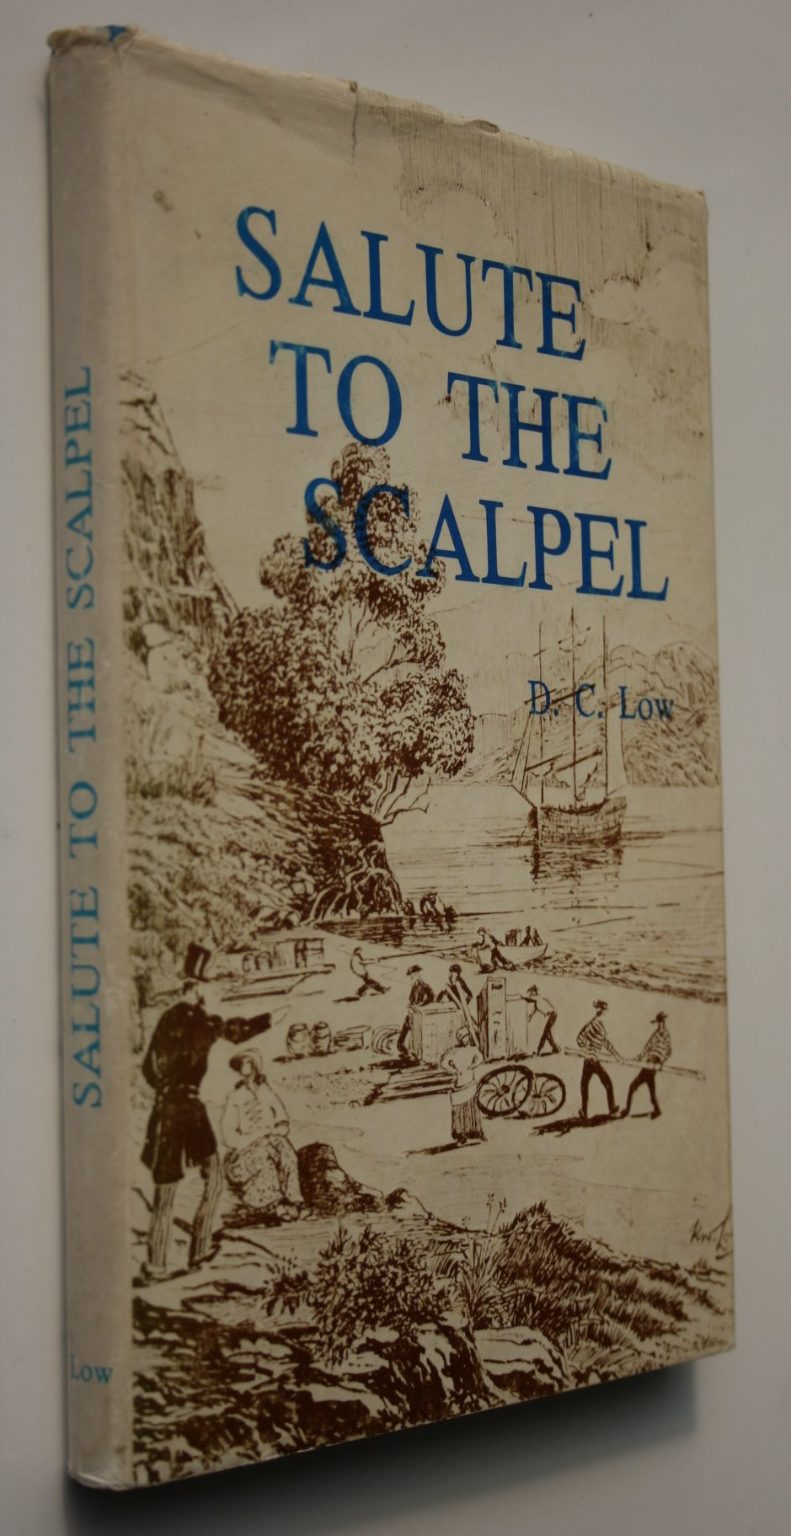 Salute to the Scalpel. A medical history of the Nelson Province : Fifty years of experience as a Medical Superintendent, Part time surgeon, Chairman of the Nelson Hospital Board, and general practice in Nelson City by D. C. Low. SIGNED BY AUTHOR.